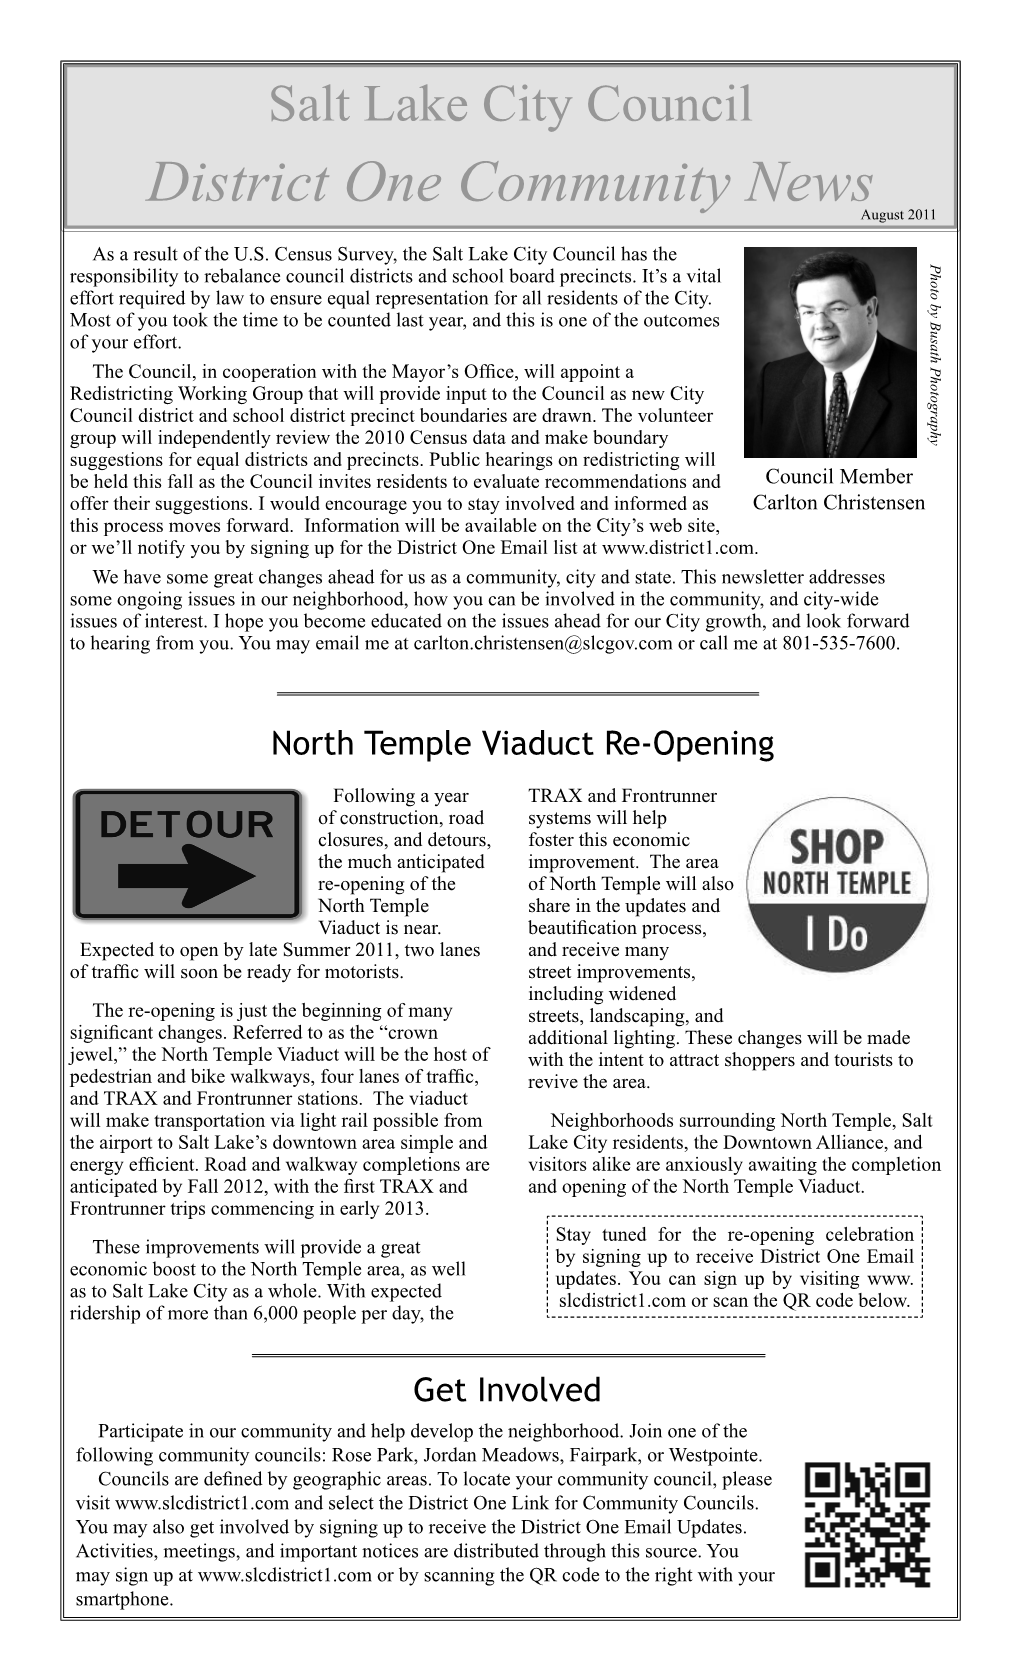 District One Community News August 2011